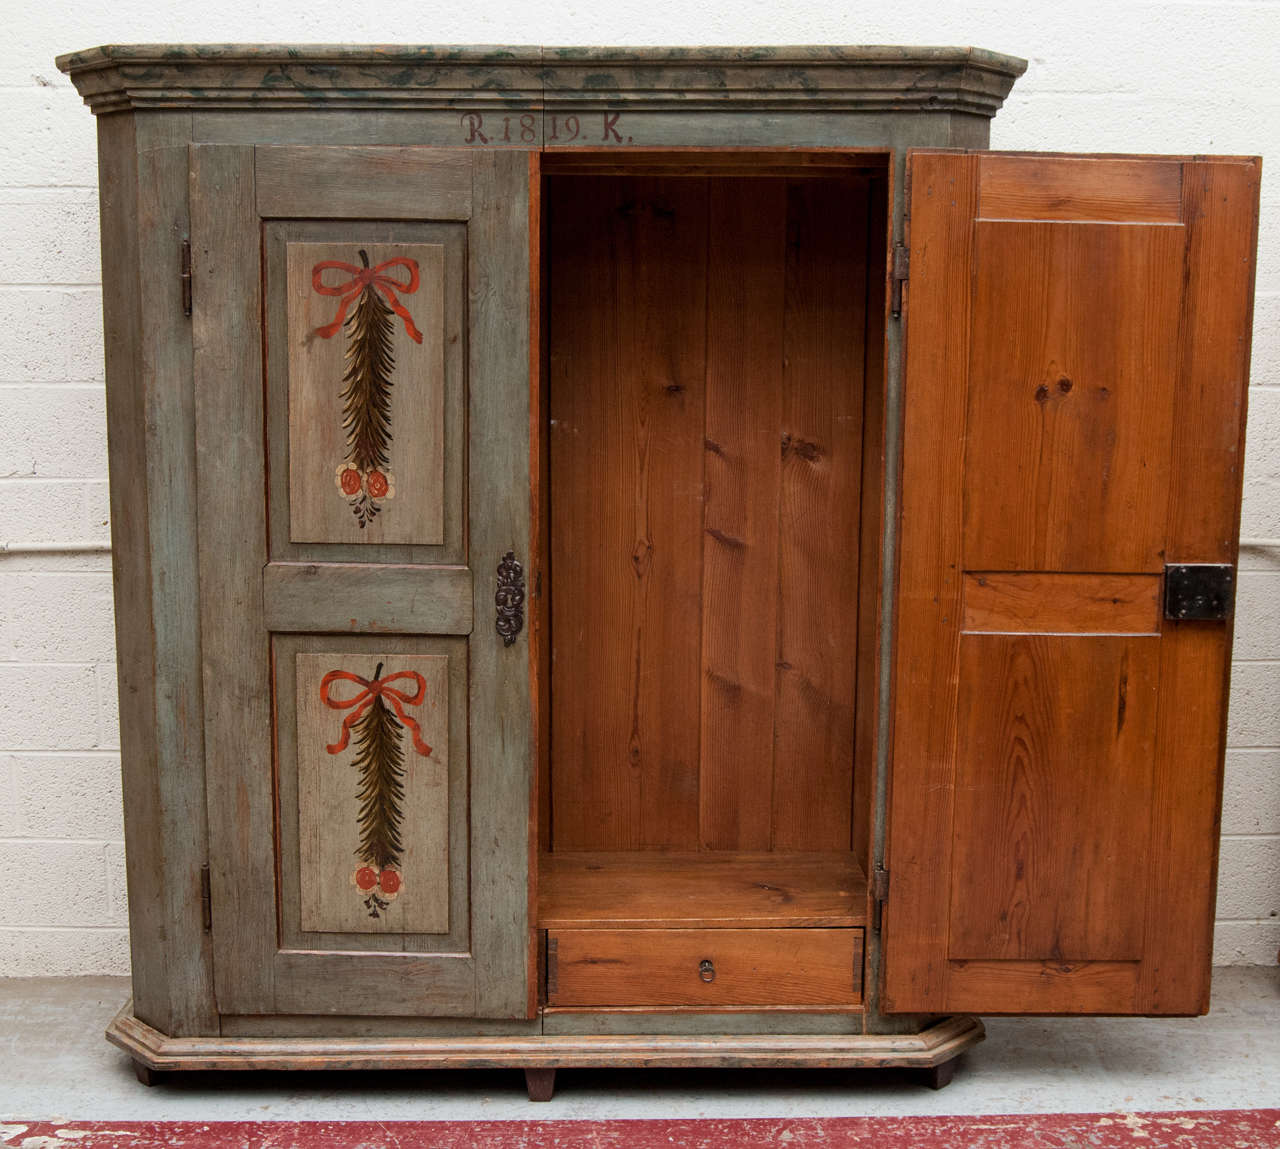 An outstanding example of early nineteenth century painted furniture, this armoire was almost certainly given as a wedding gift to 